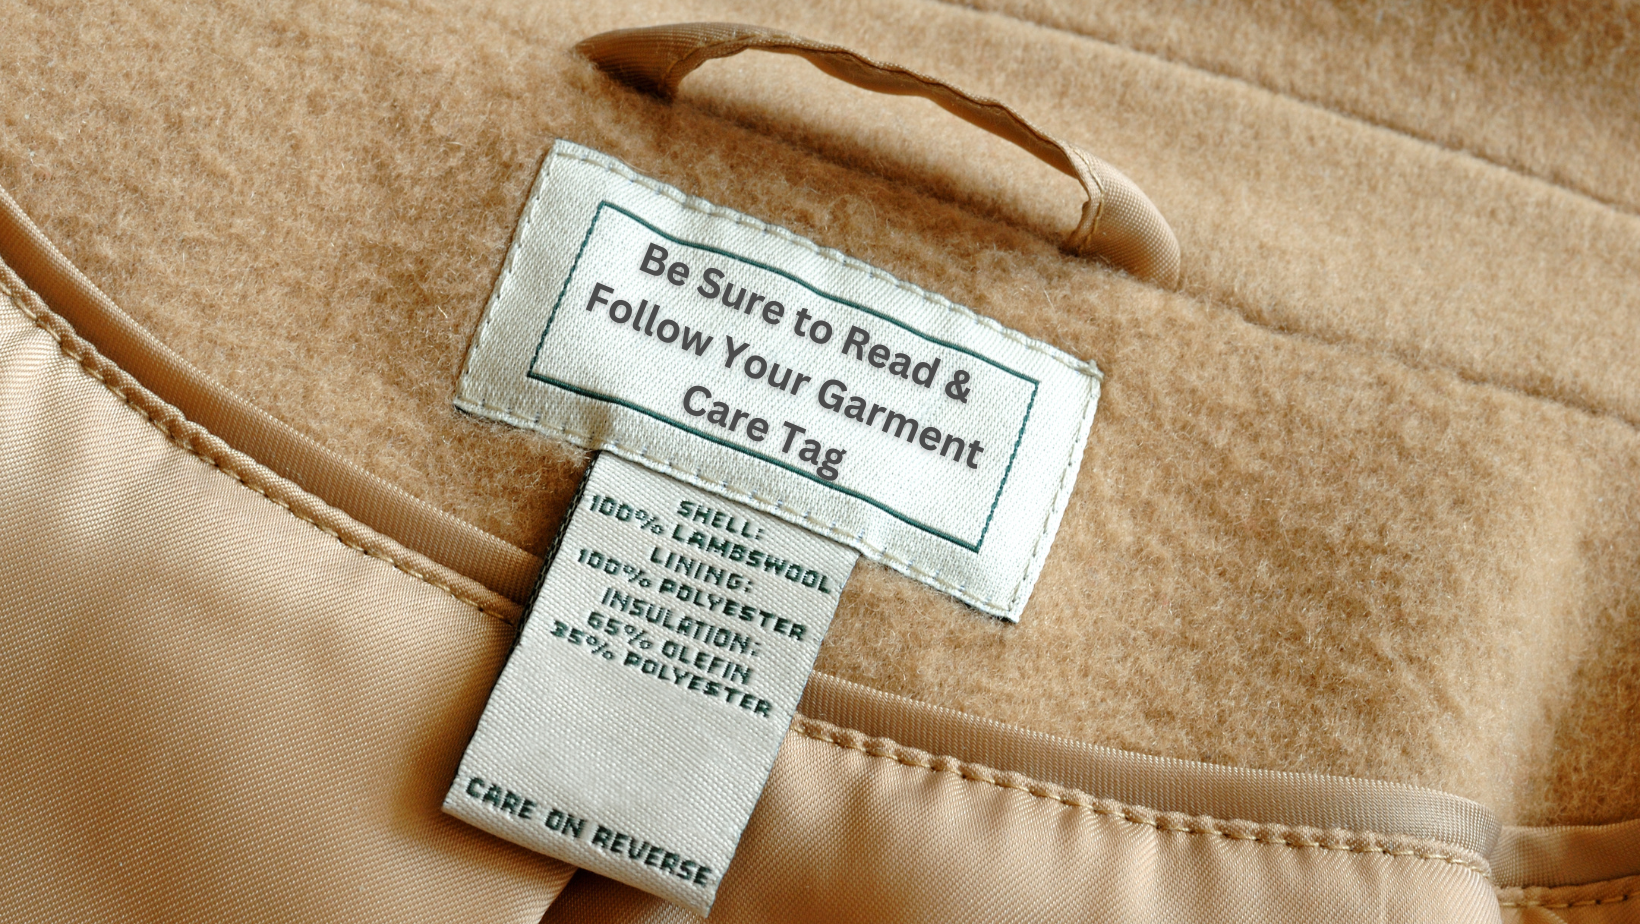 Be sure to always follow your garment care tag when learning about how to increase the longevity of your garment